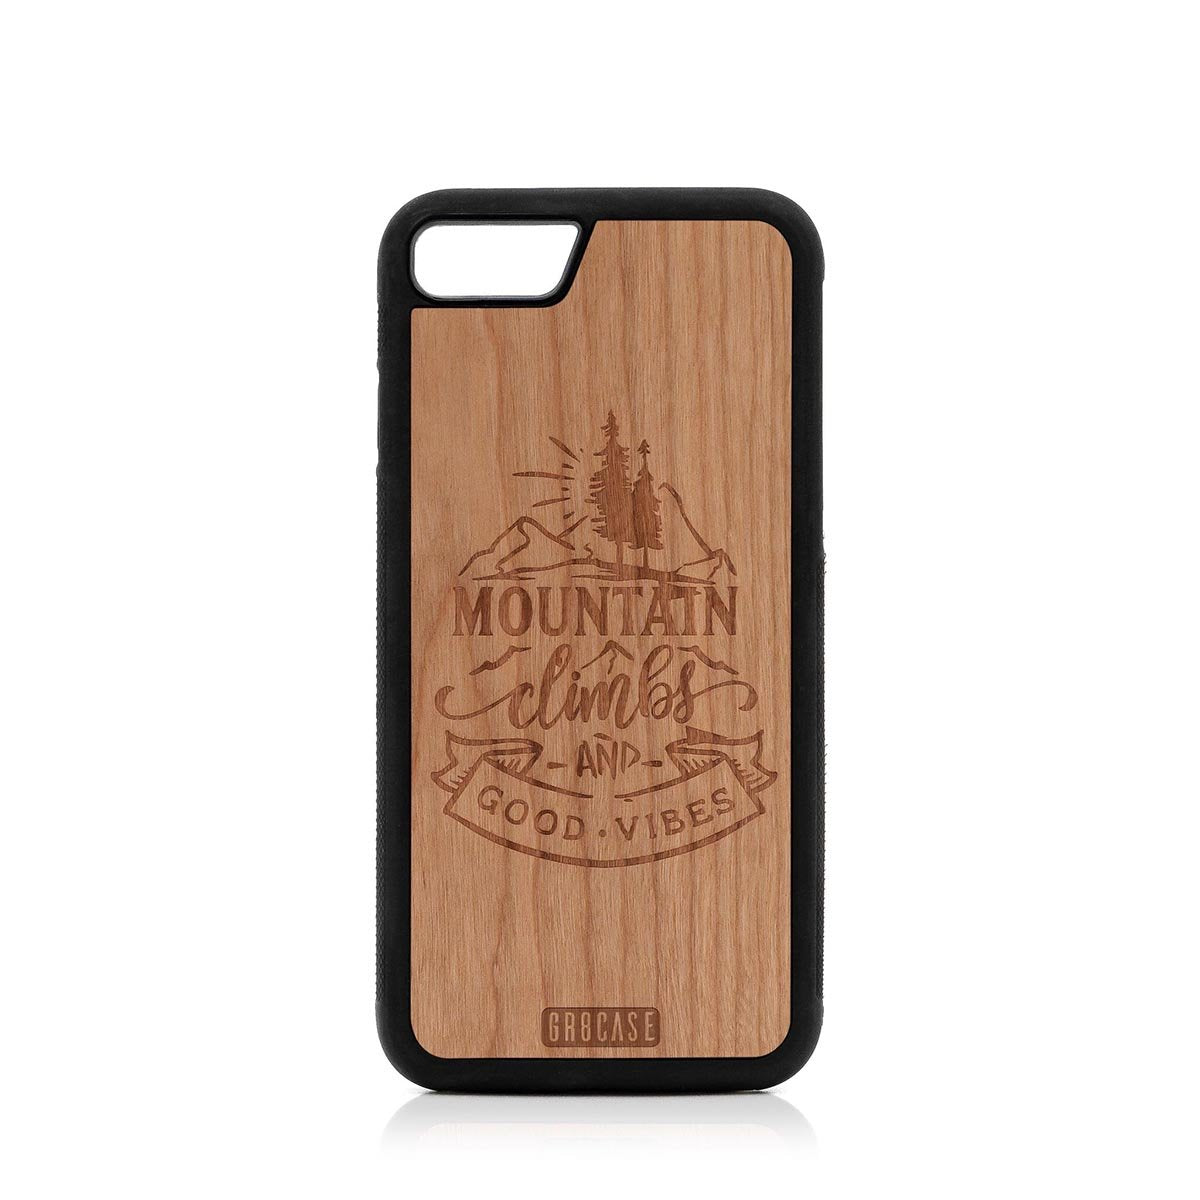 Mountain Climbs And Good Vibes Design Wood Case For iPhone SE 2020 by GR8CASE